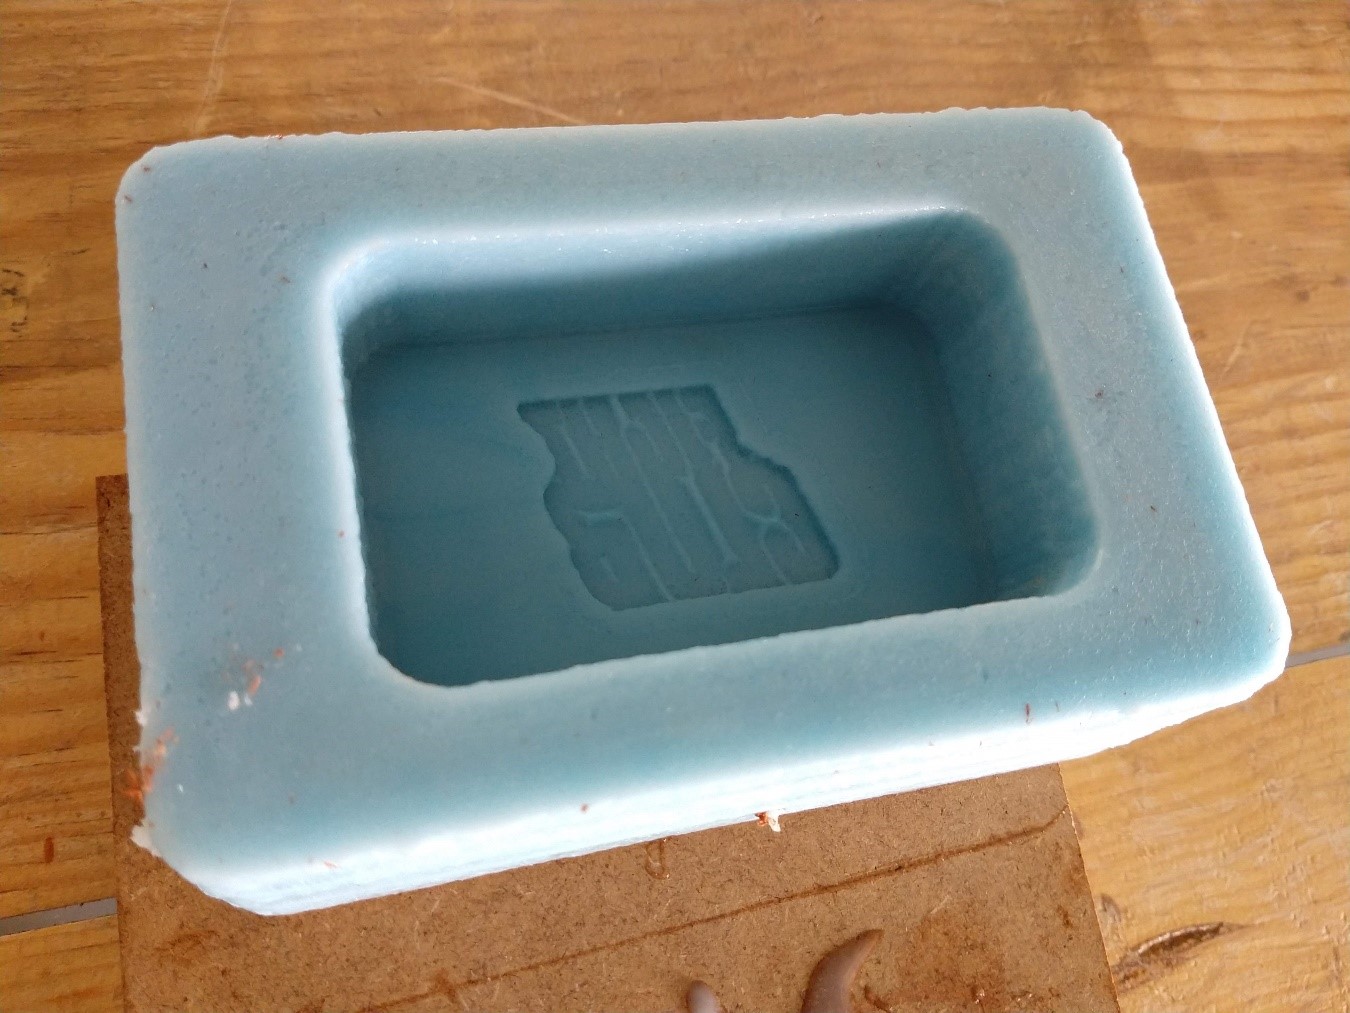 The silicone mold